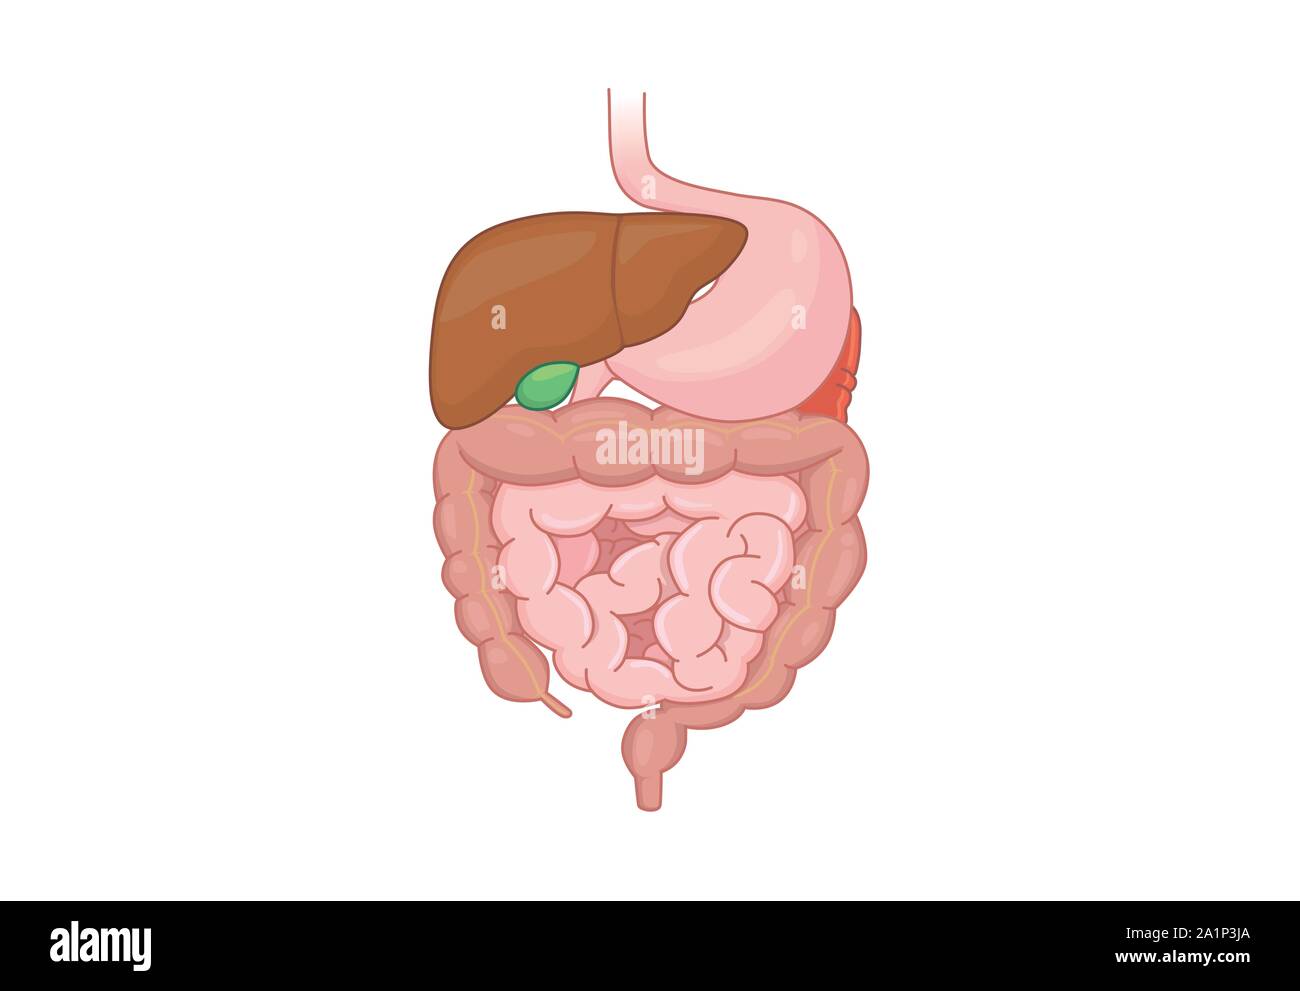 Digestive system organ of Human isolated on white background. Human Anatomy. Stock Vector